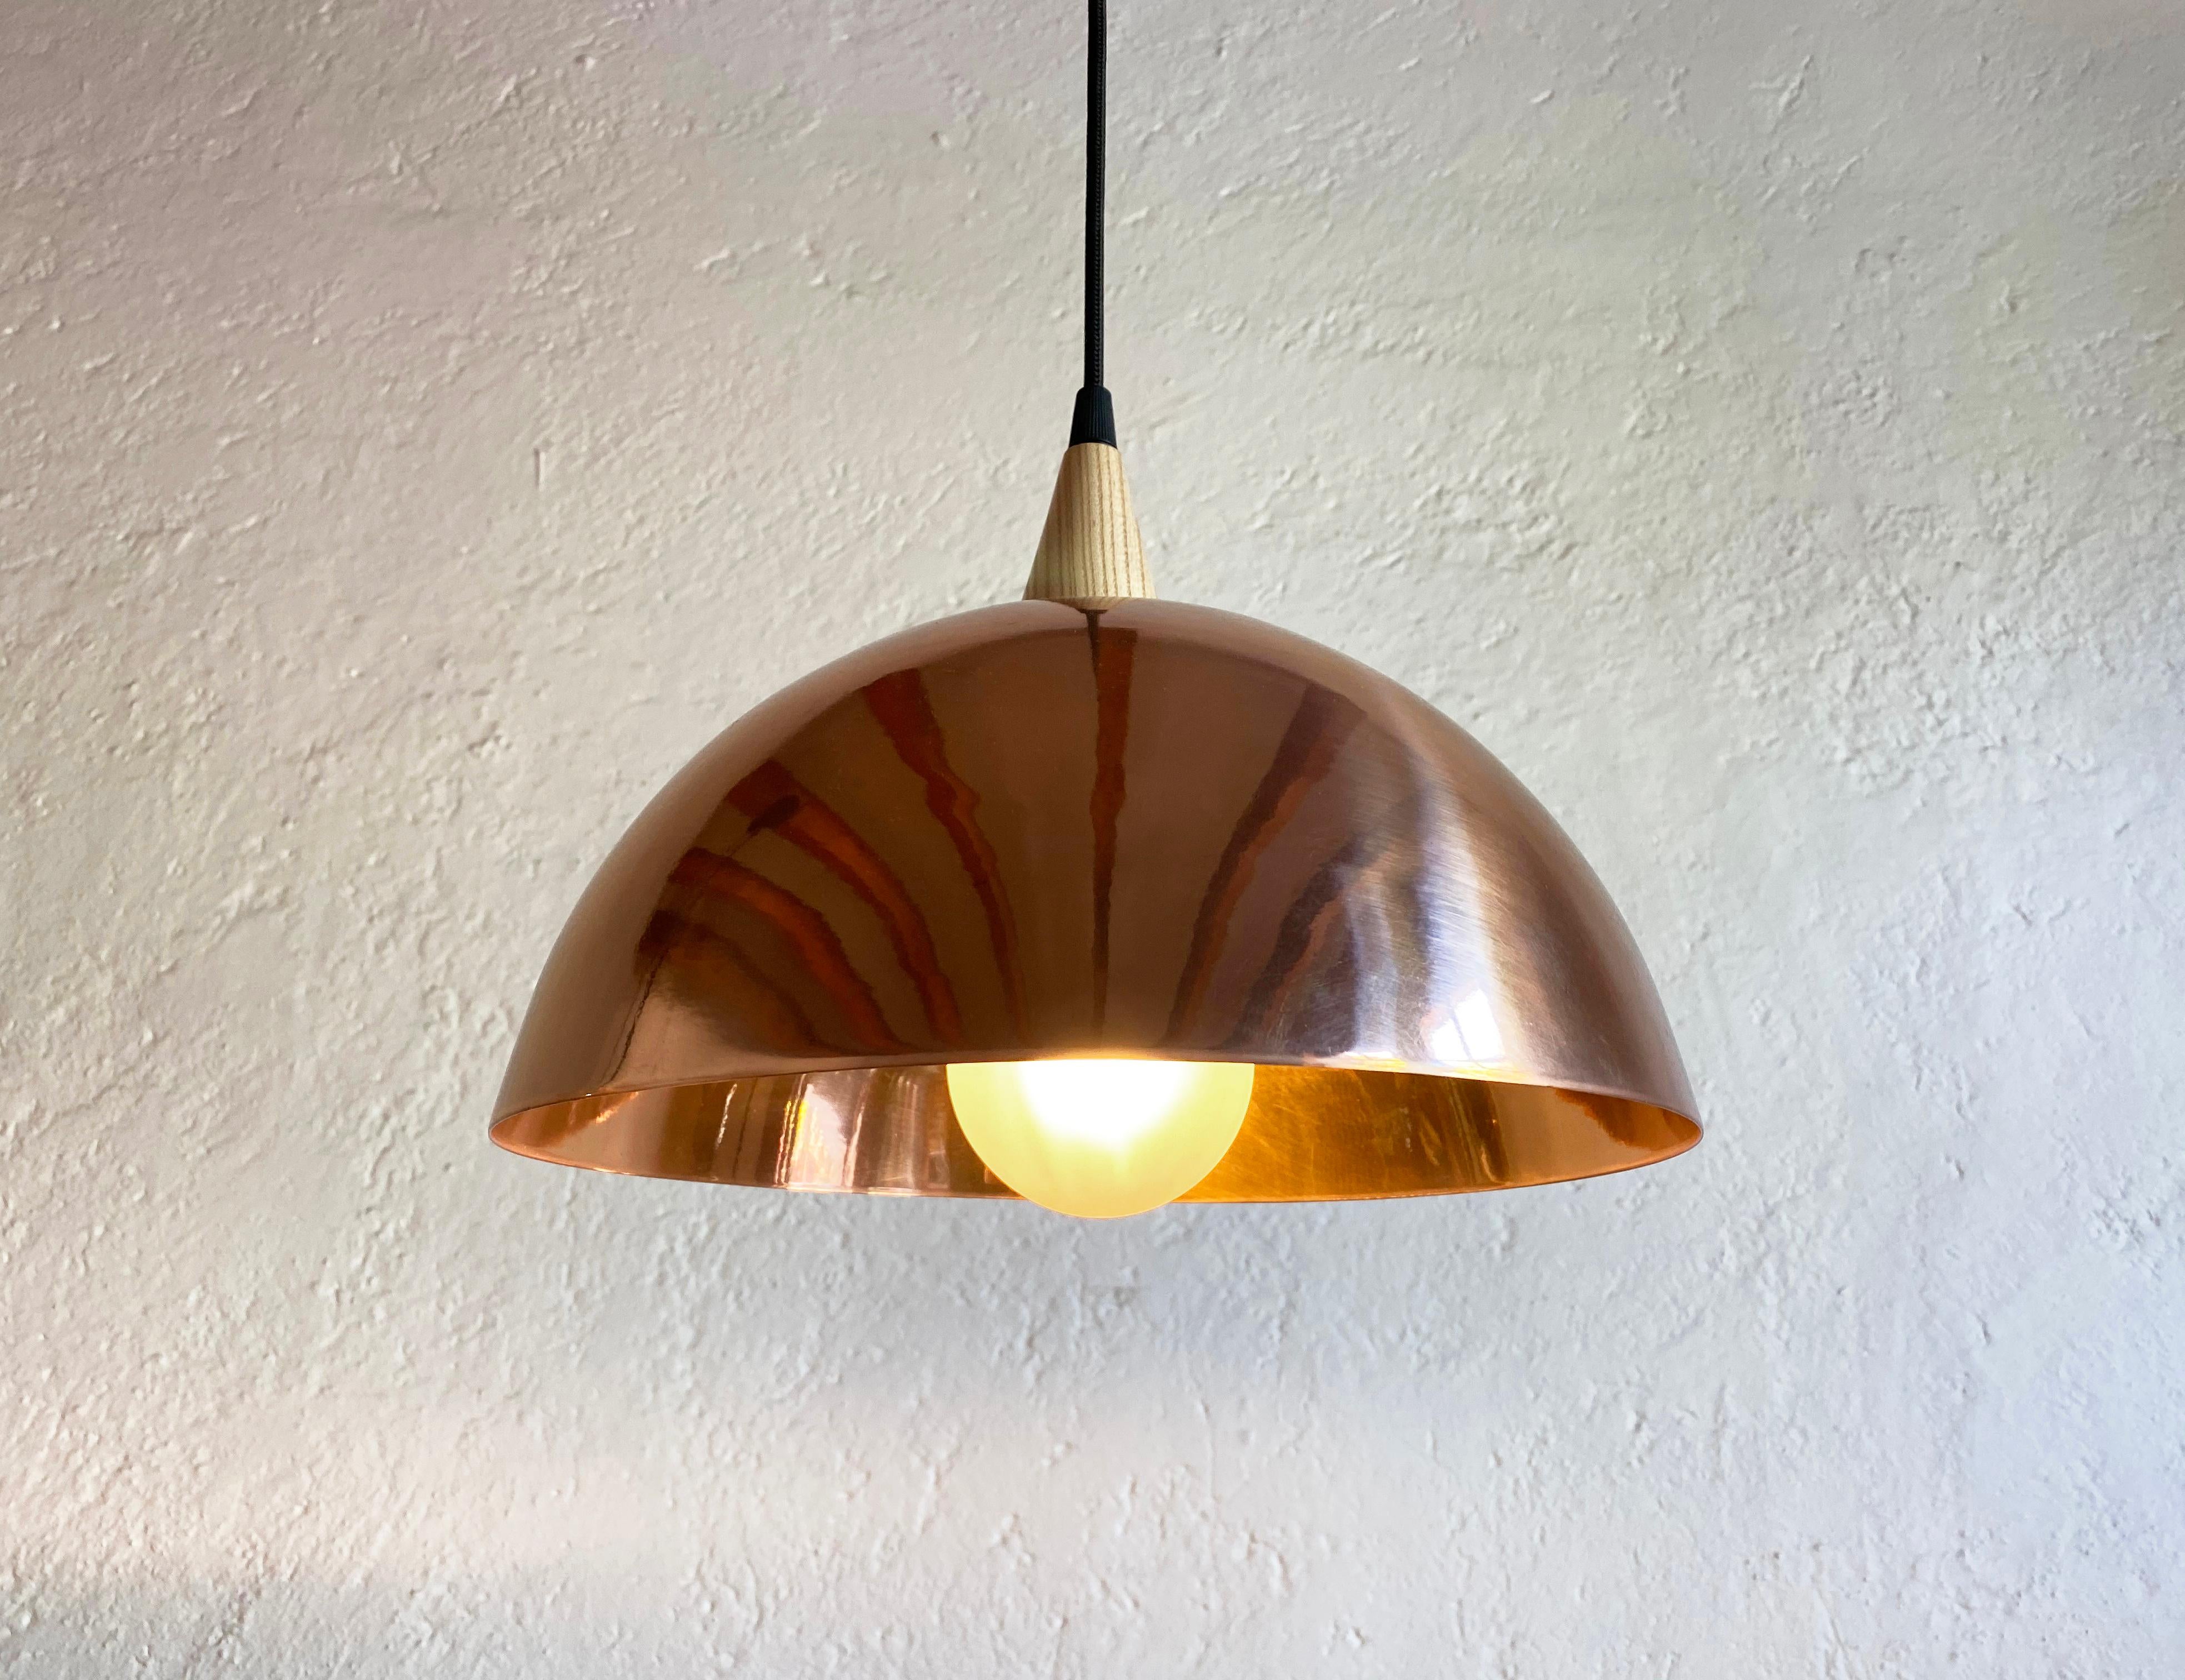 Mexican Domo Abajo 40 Pendant Lamp, Maria Beckmann, Represented by Tuleste Factory